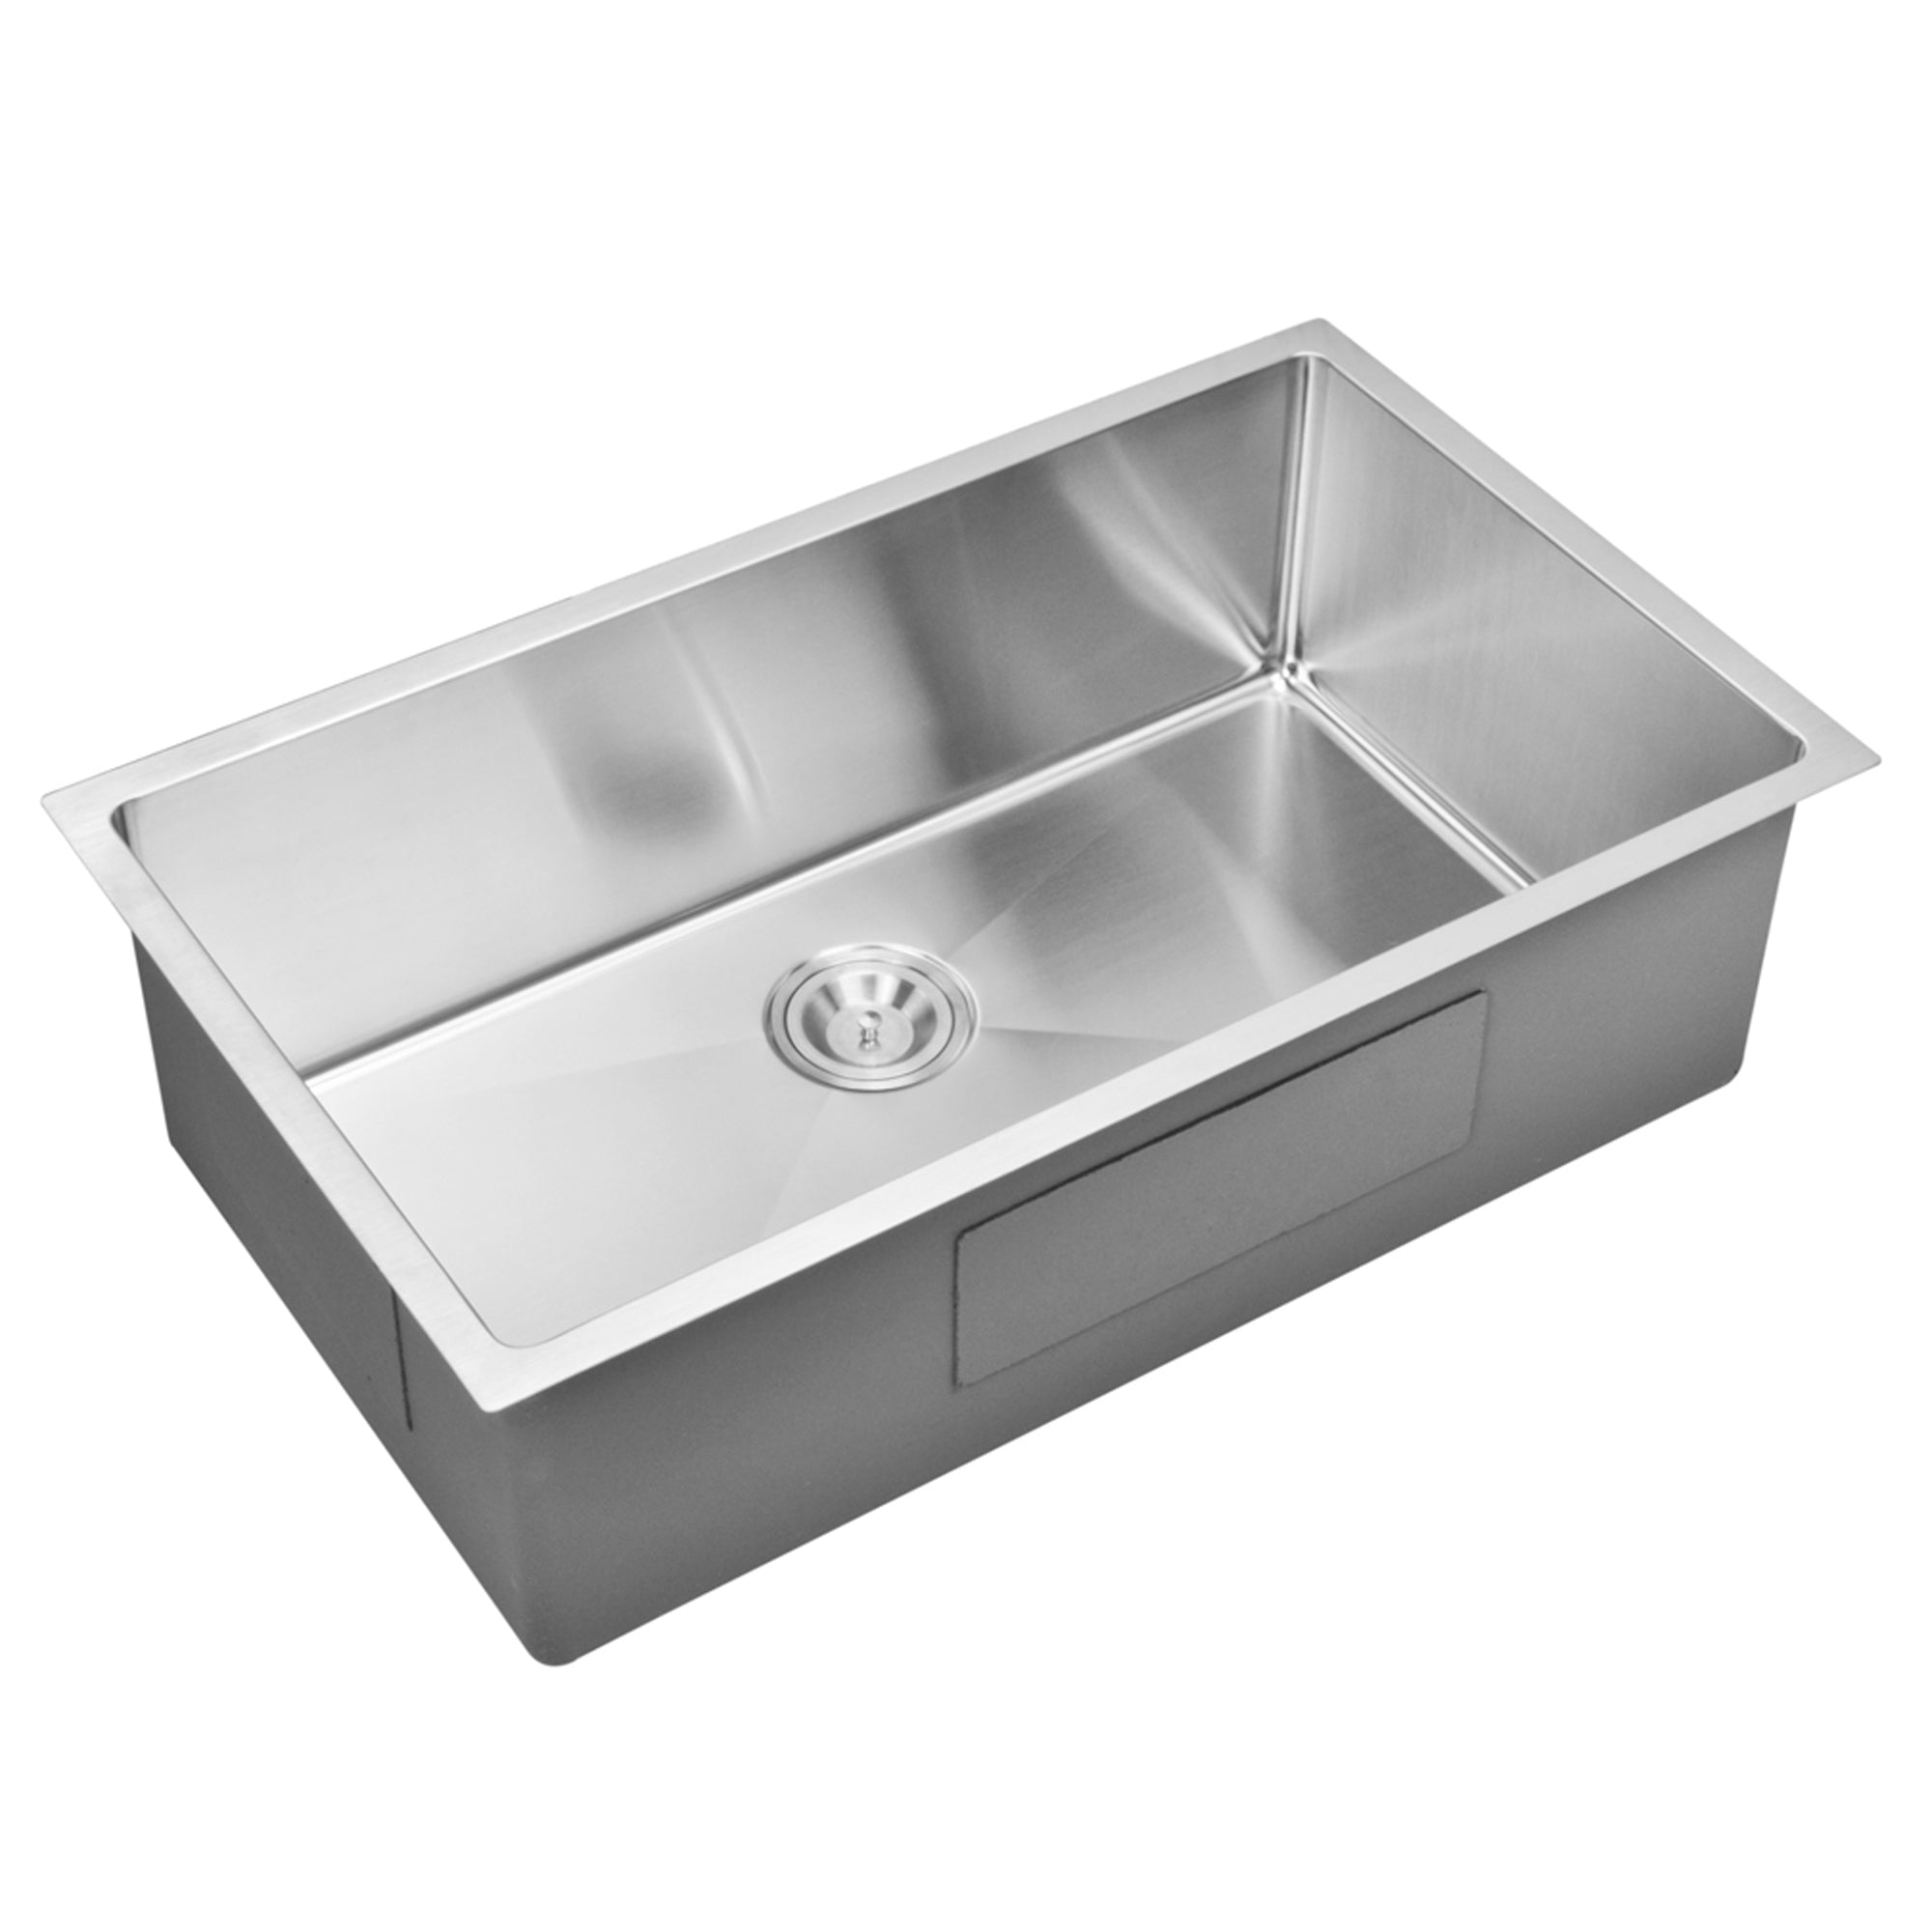 32 Inch X 19 Inch 15mm Corner Radius Single Bowl Stainless Steel Hand Made Undermount Kitchen Sink With Drain and Strainer